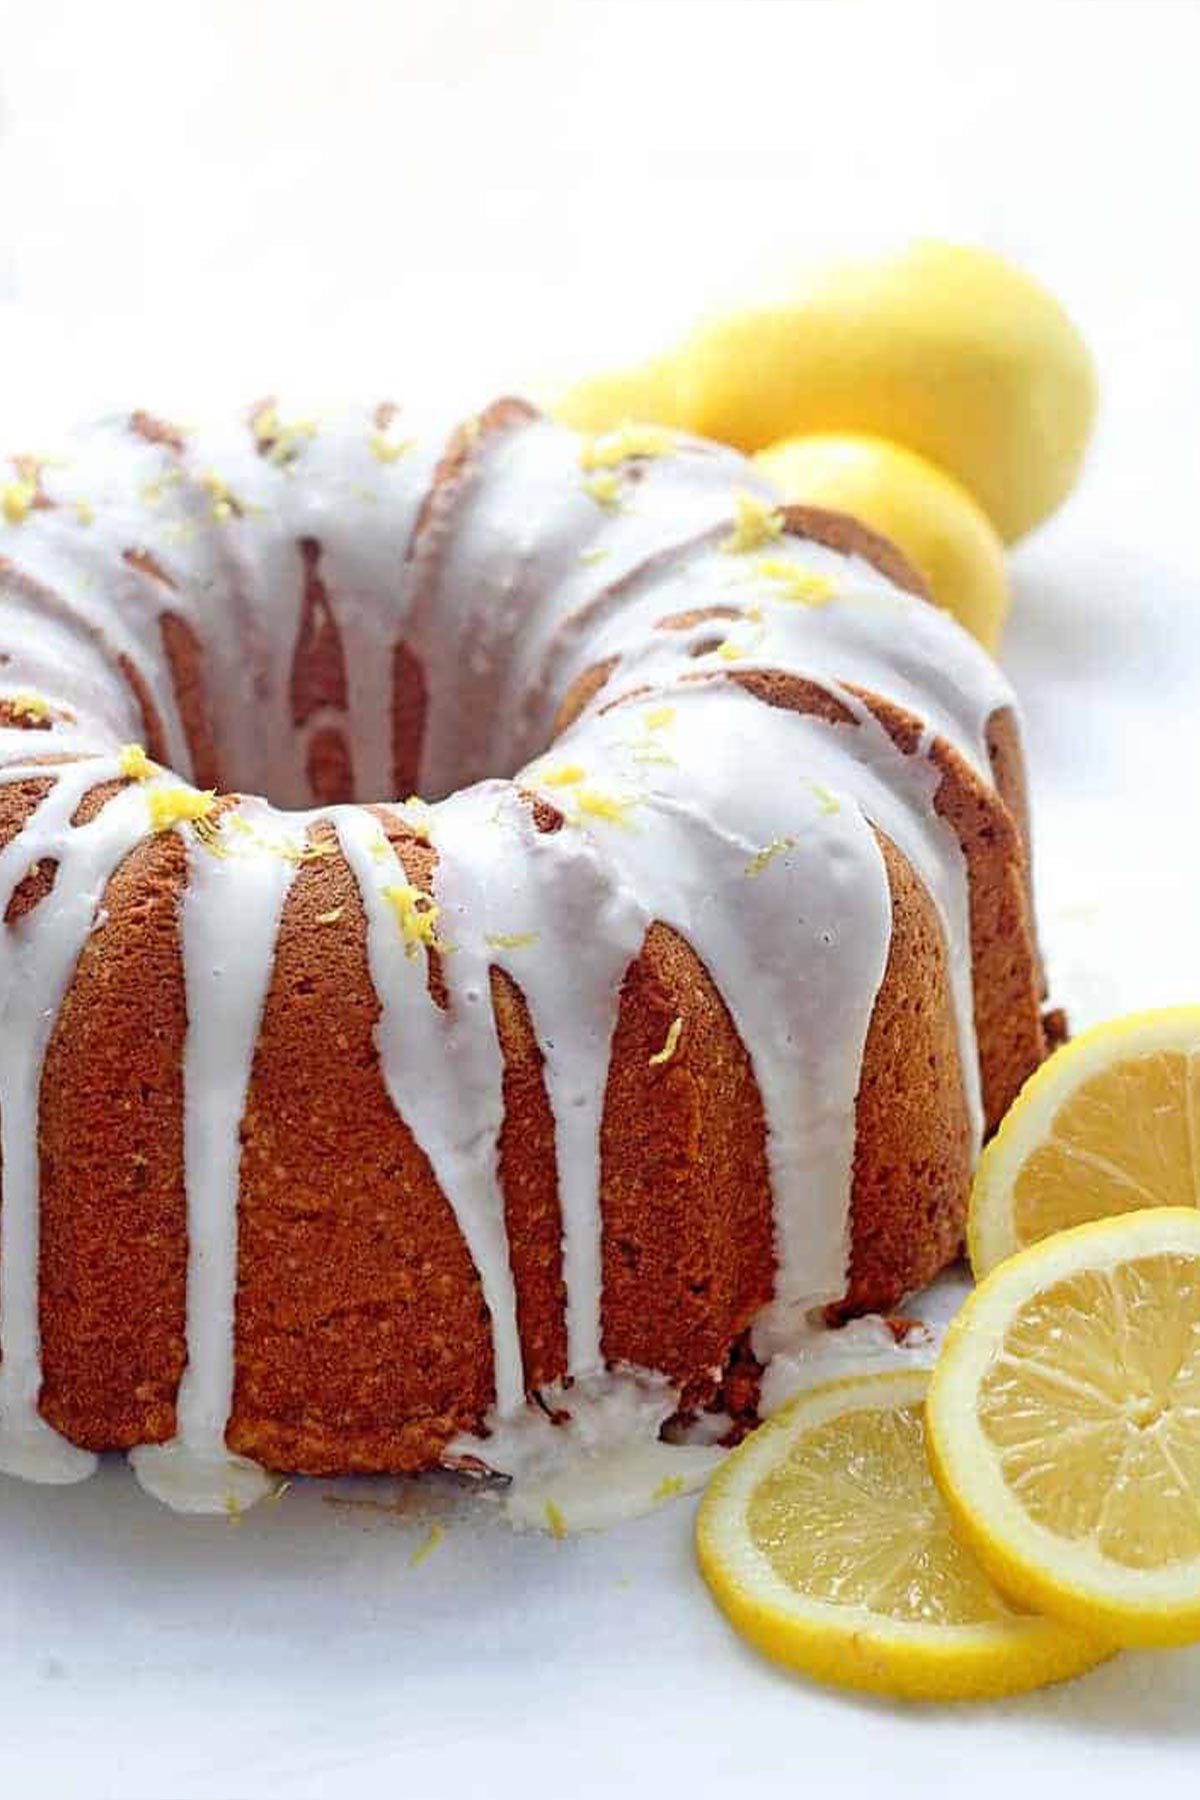 The best lemon pound cake on the table with glaze and fresh slices of lemon.